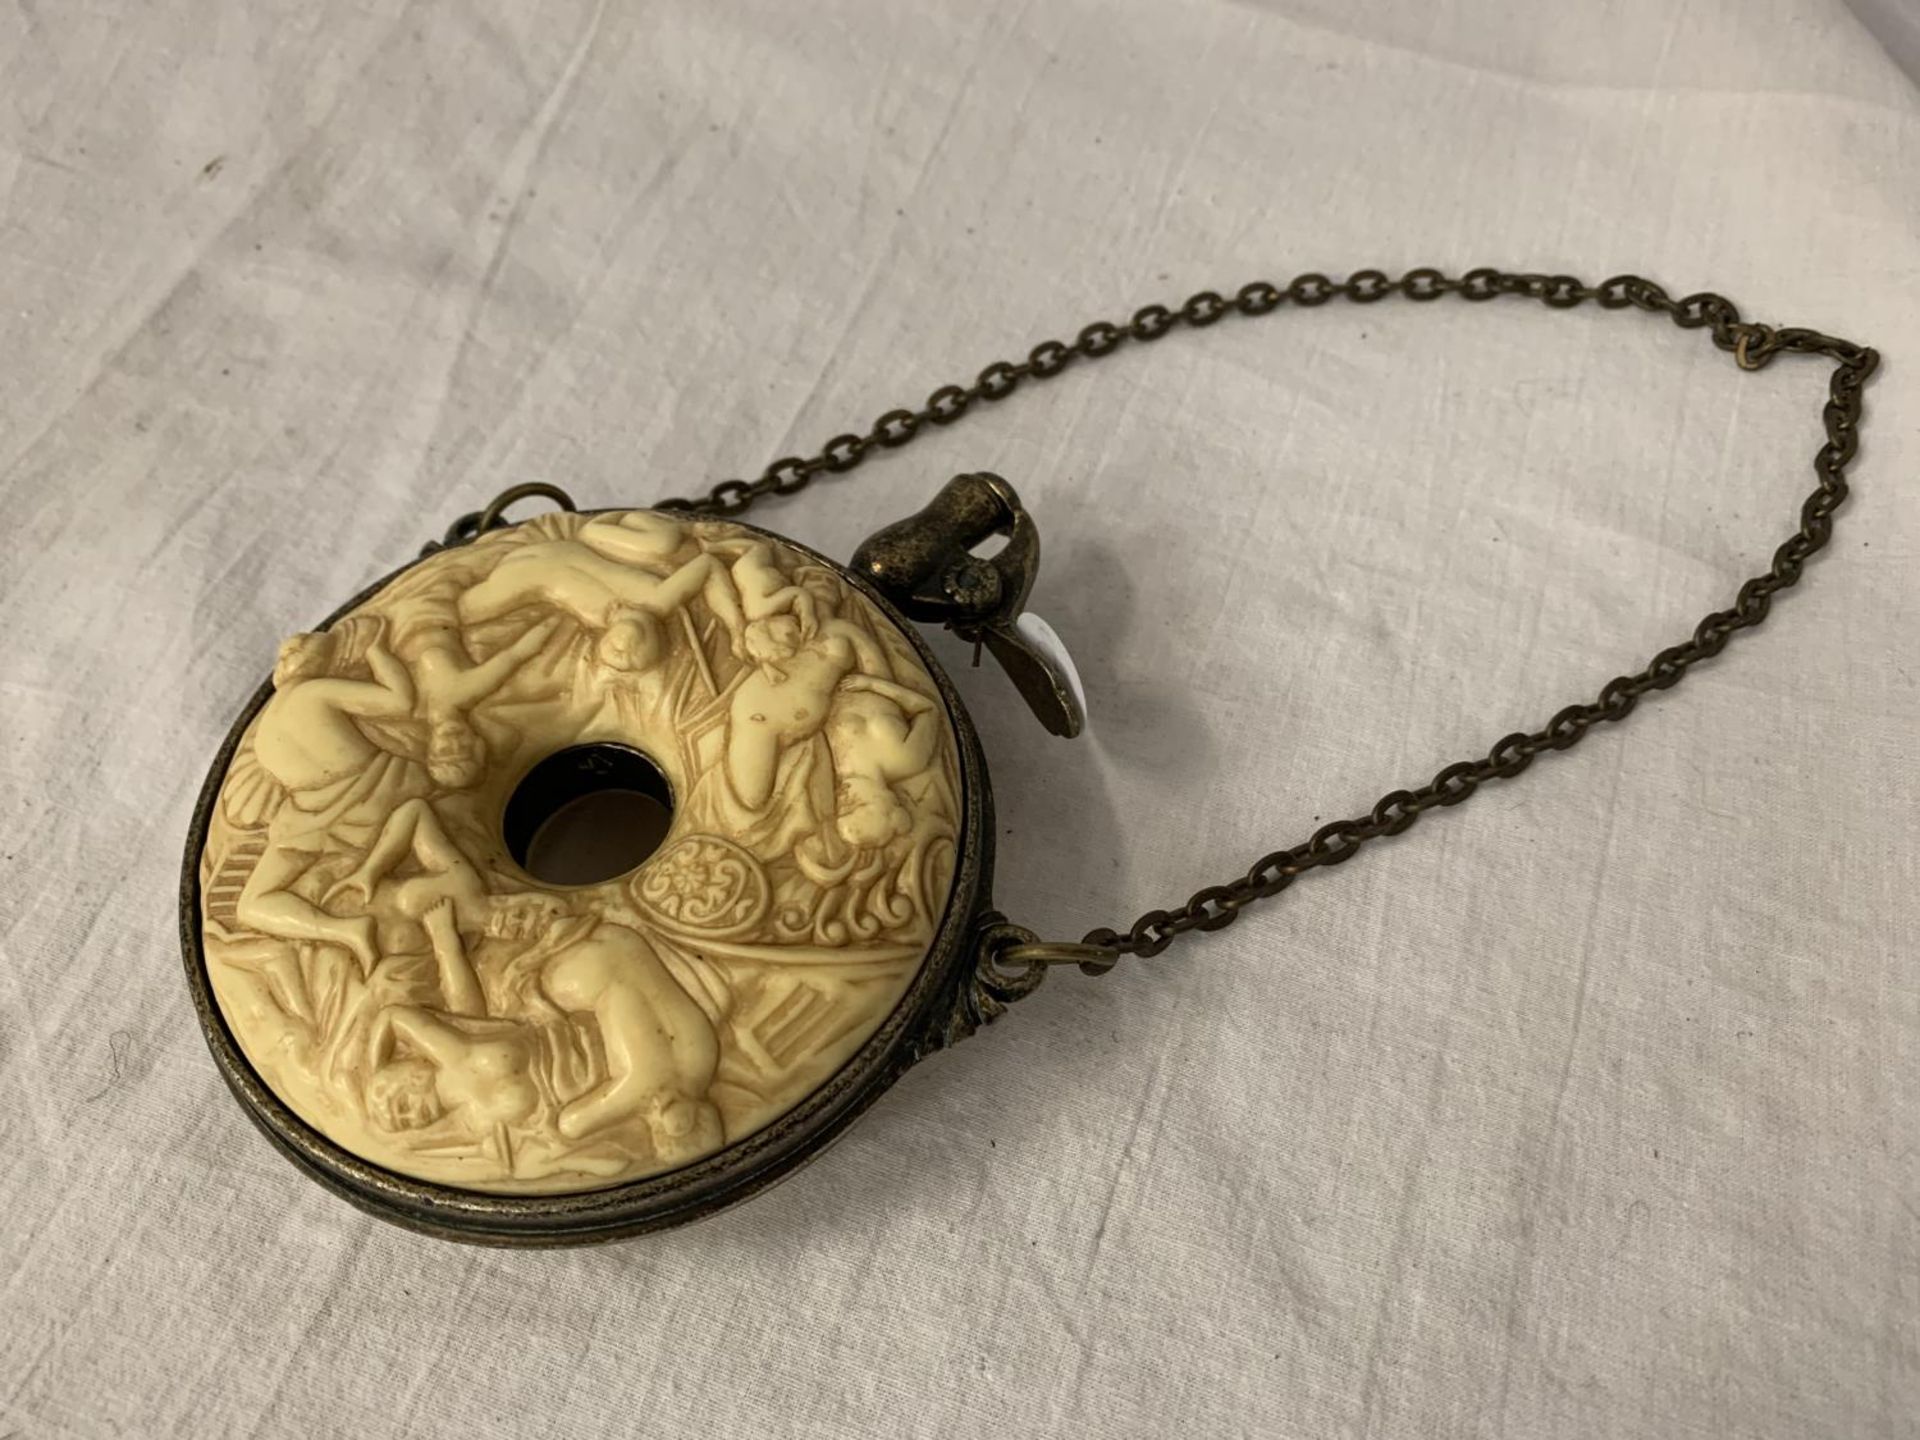 A HEAVILY CARVED GUNPOWDER FLASK WITH WHITE METAL DETAIL AND CHAIN ATTACHED DIA: 10.5CM - Image 3 of 4